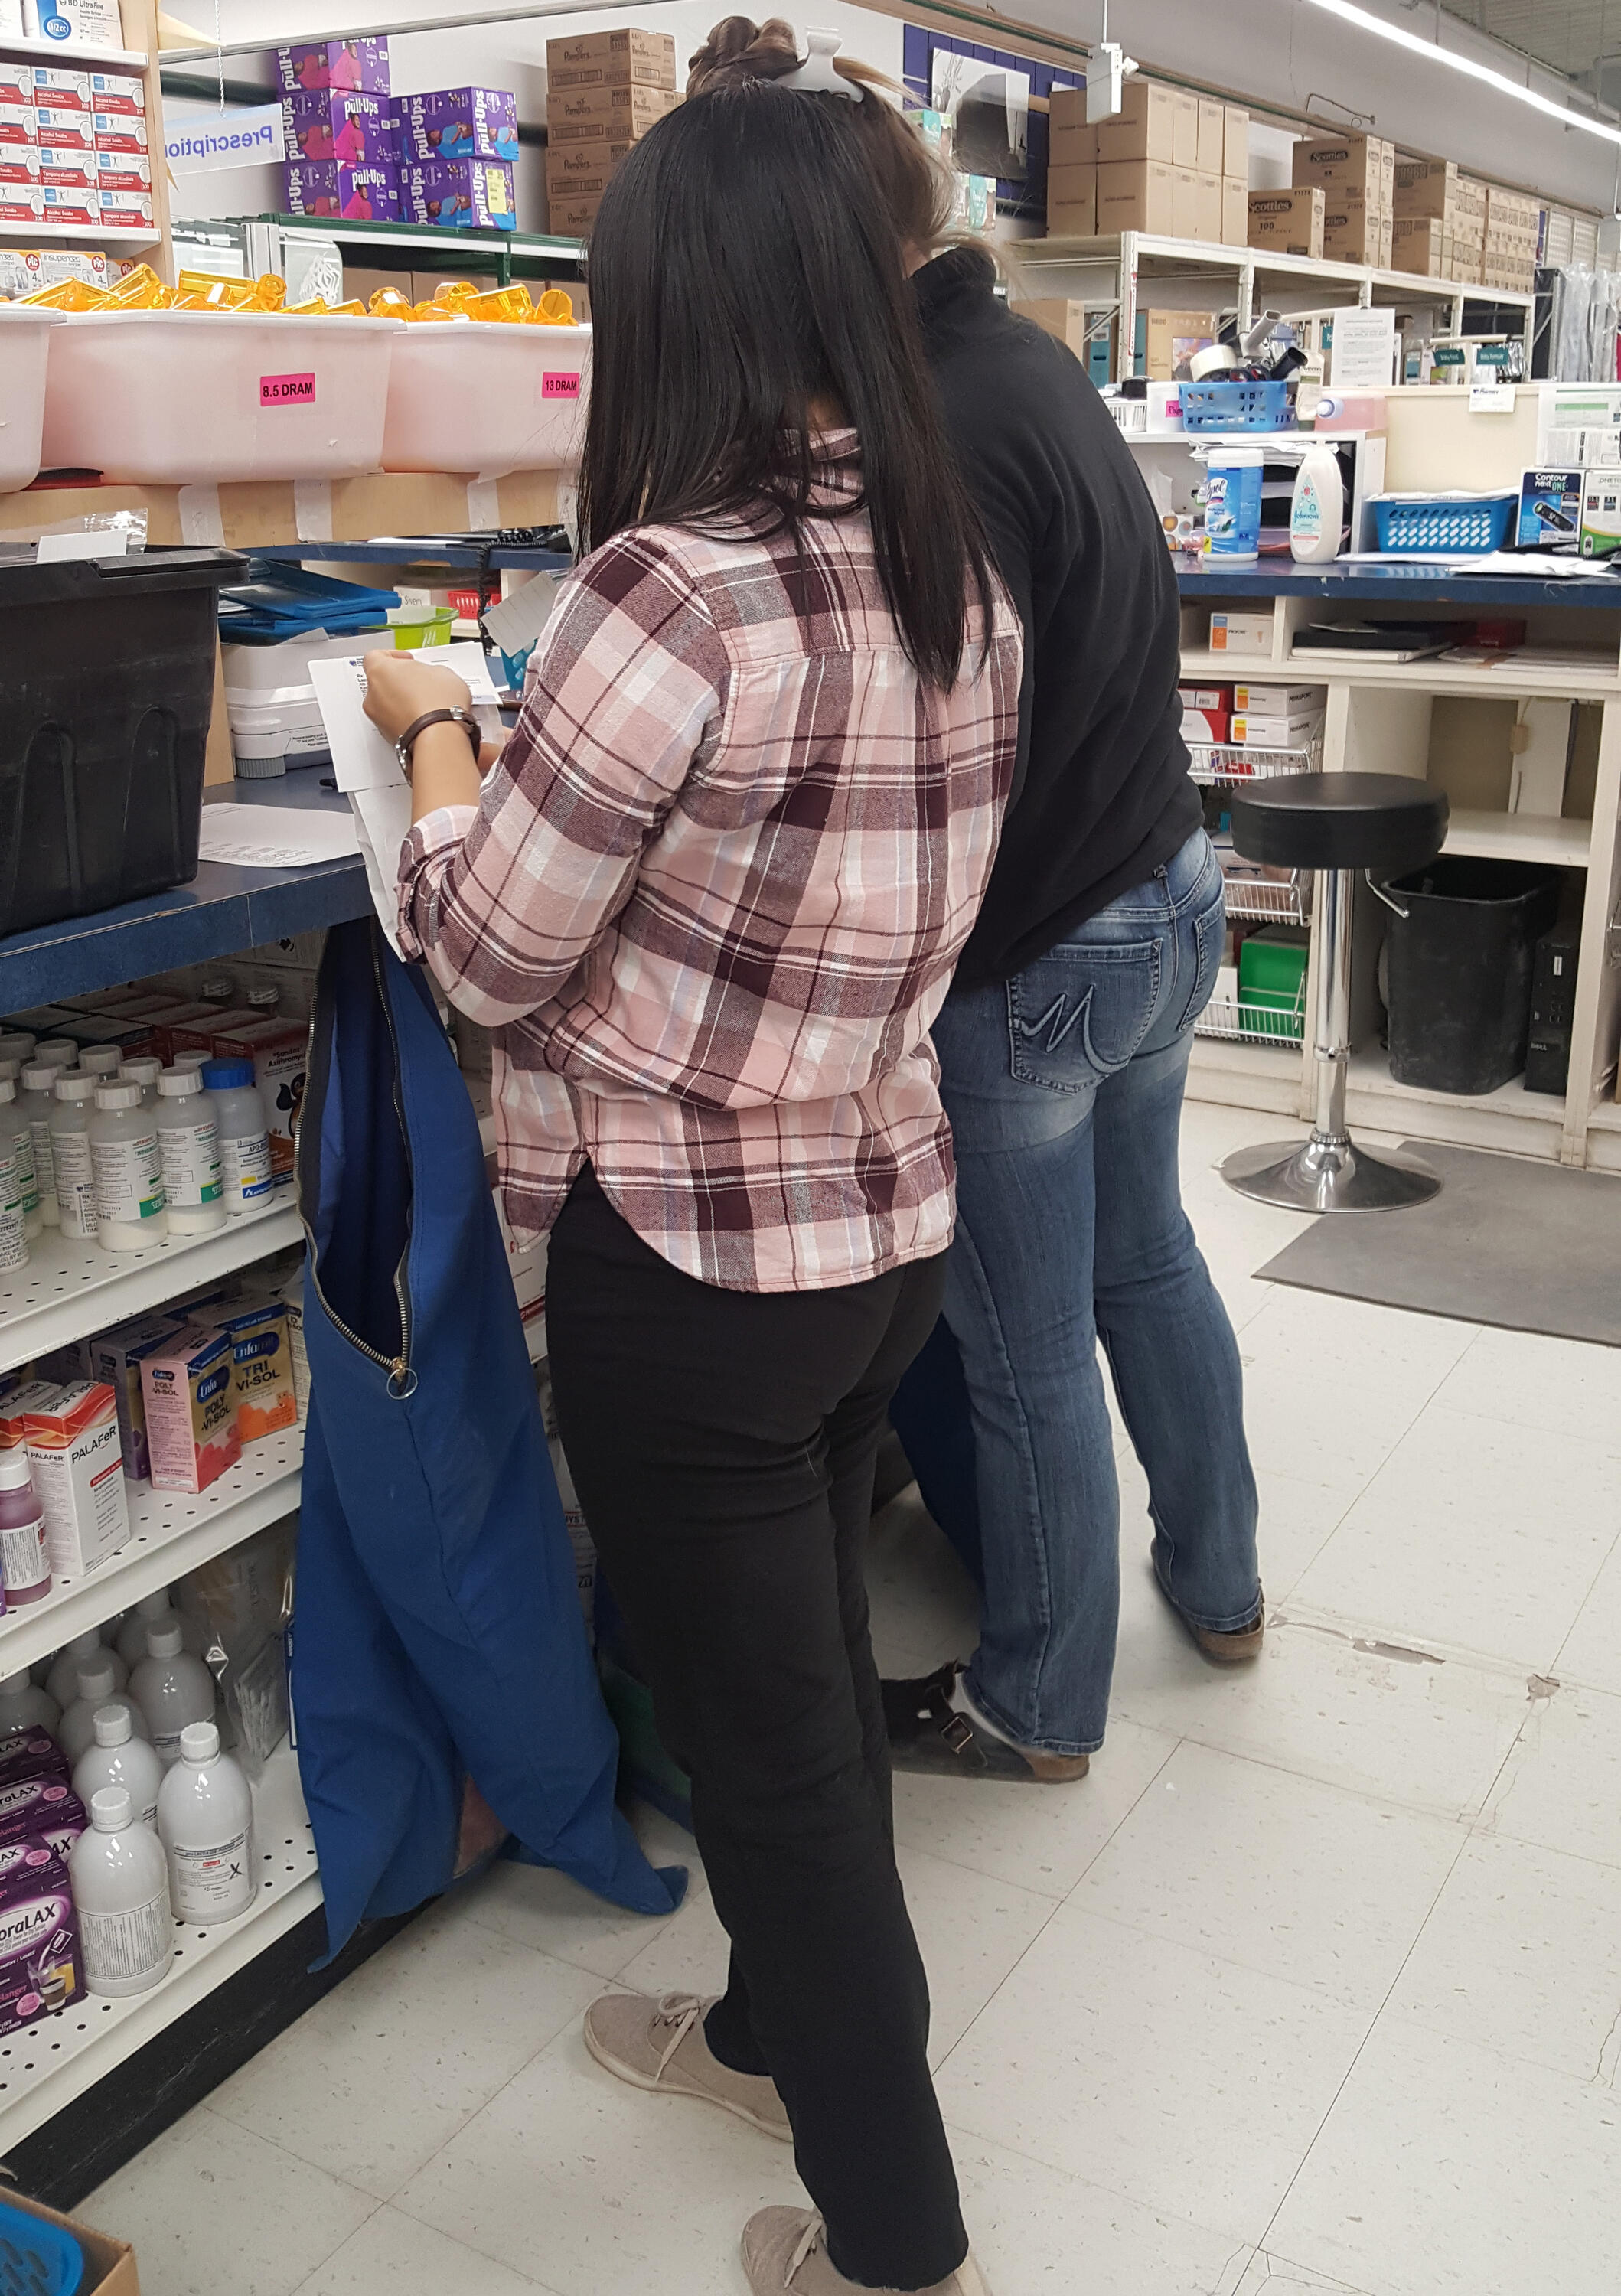 Celine filling a bag with medication at a pharmacy